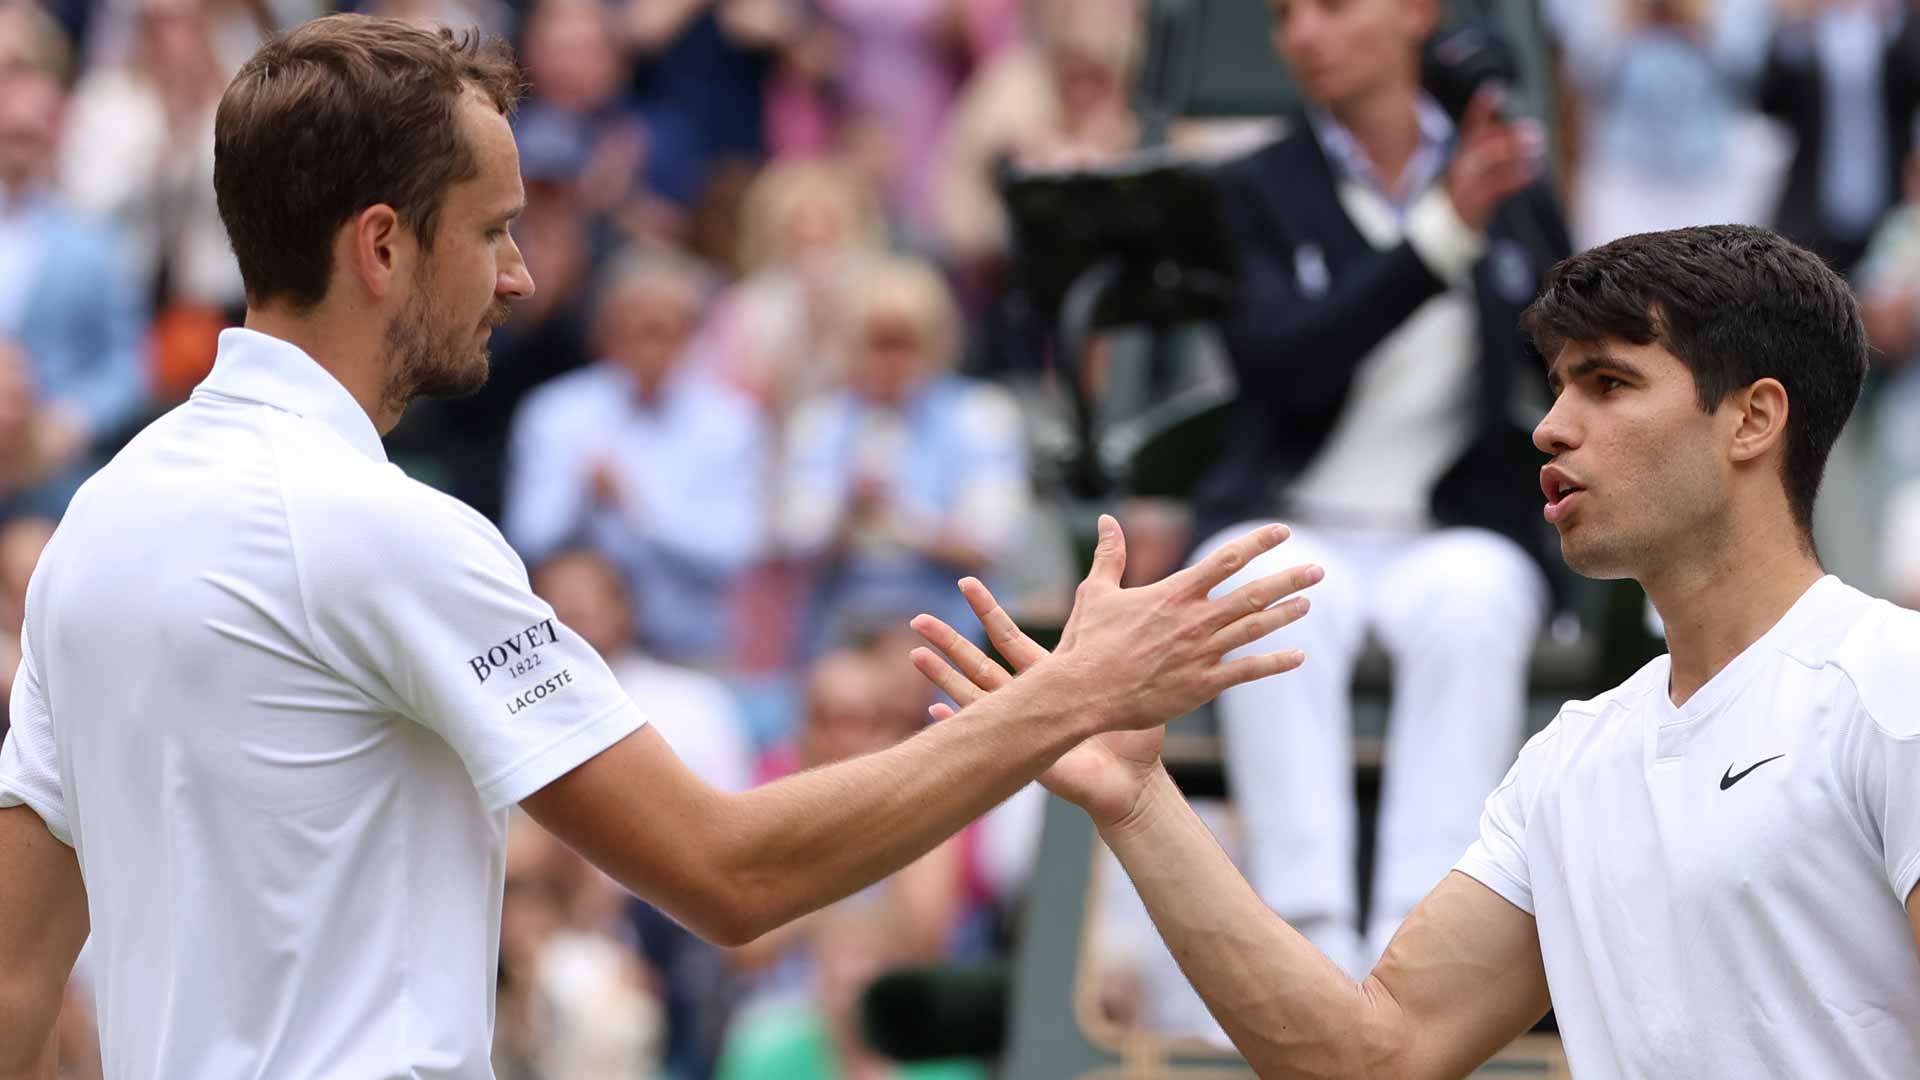 Daniil Medvedev falls to Carlos Alcaraz in the Wimbledon semi-finals for a second straight year.